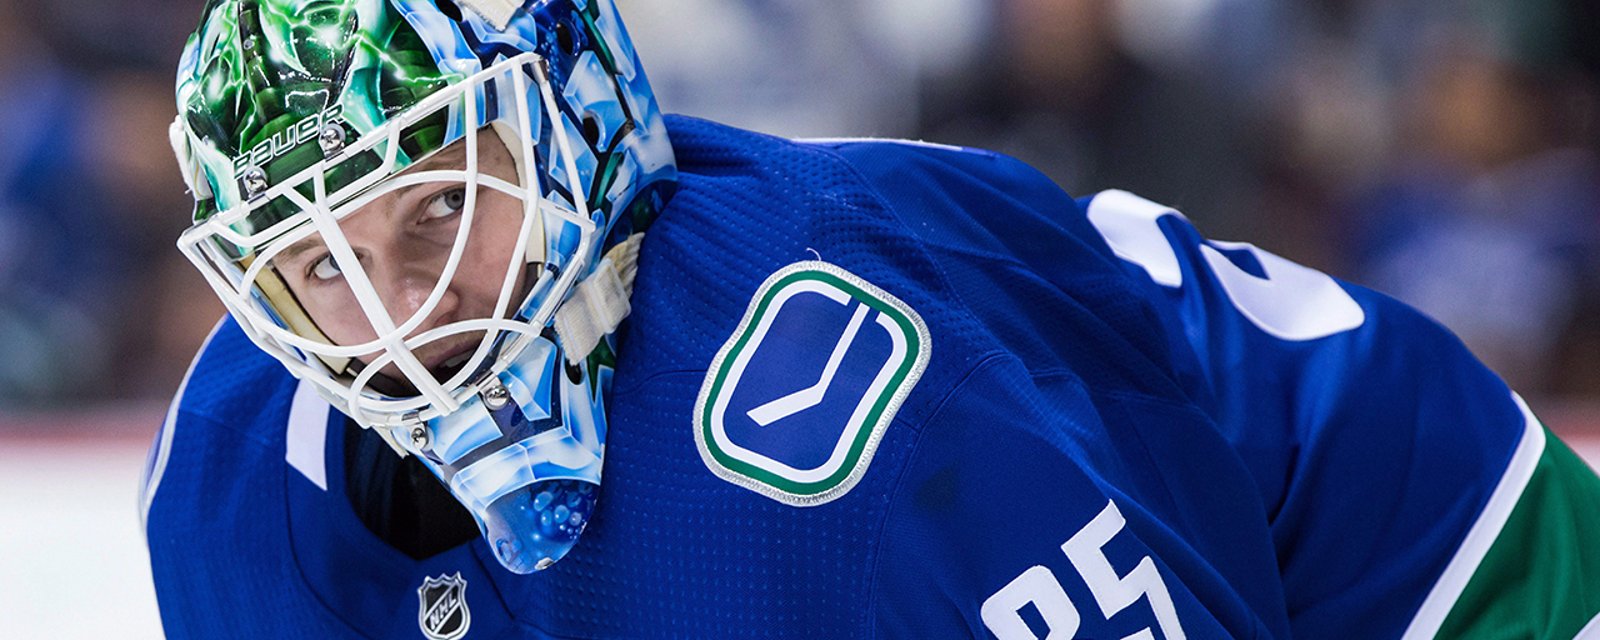 A shocking 14 Canucks have been added to the NHL's covid protocols.